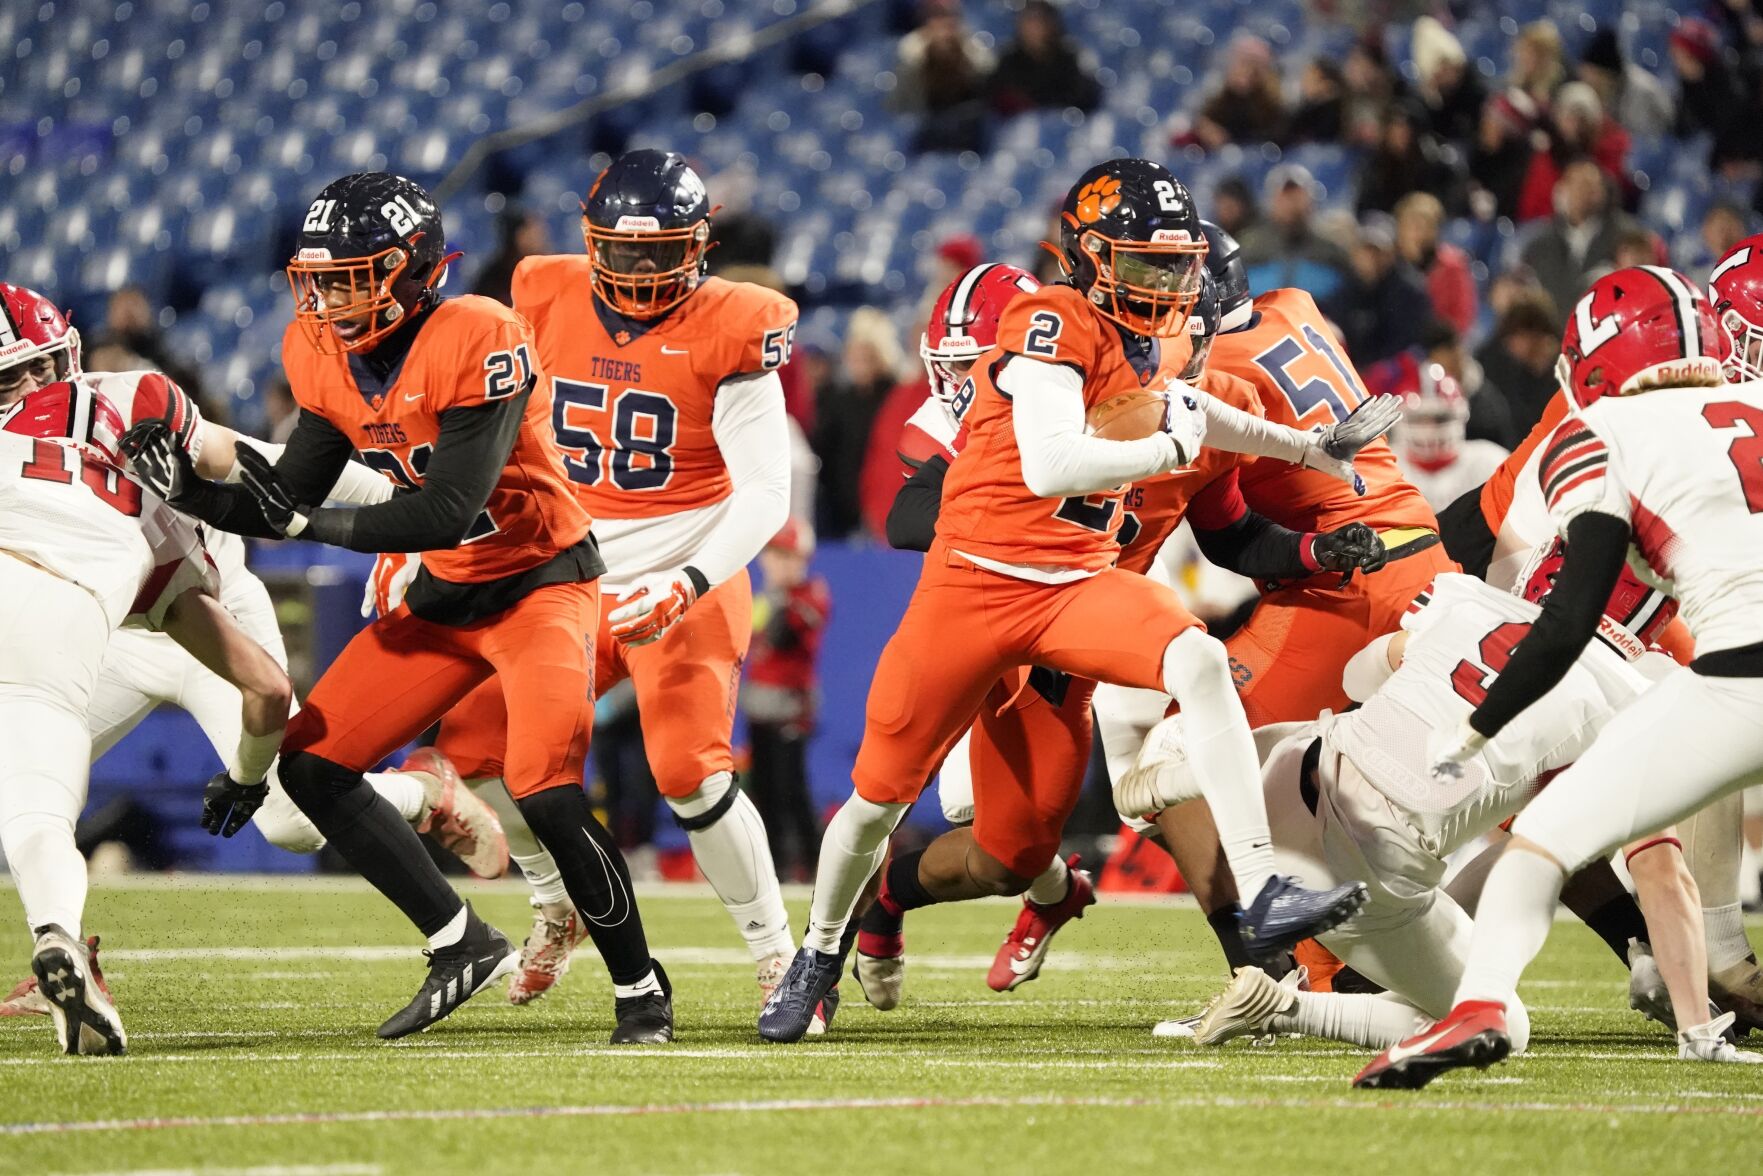 Bennett Wins Section VI Class AA Championship with Dominant Defensive Performance